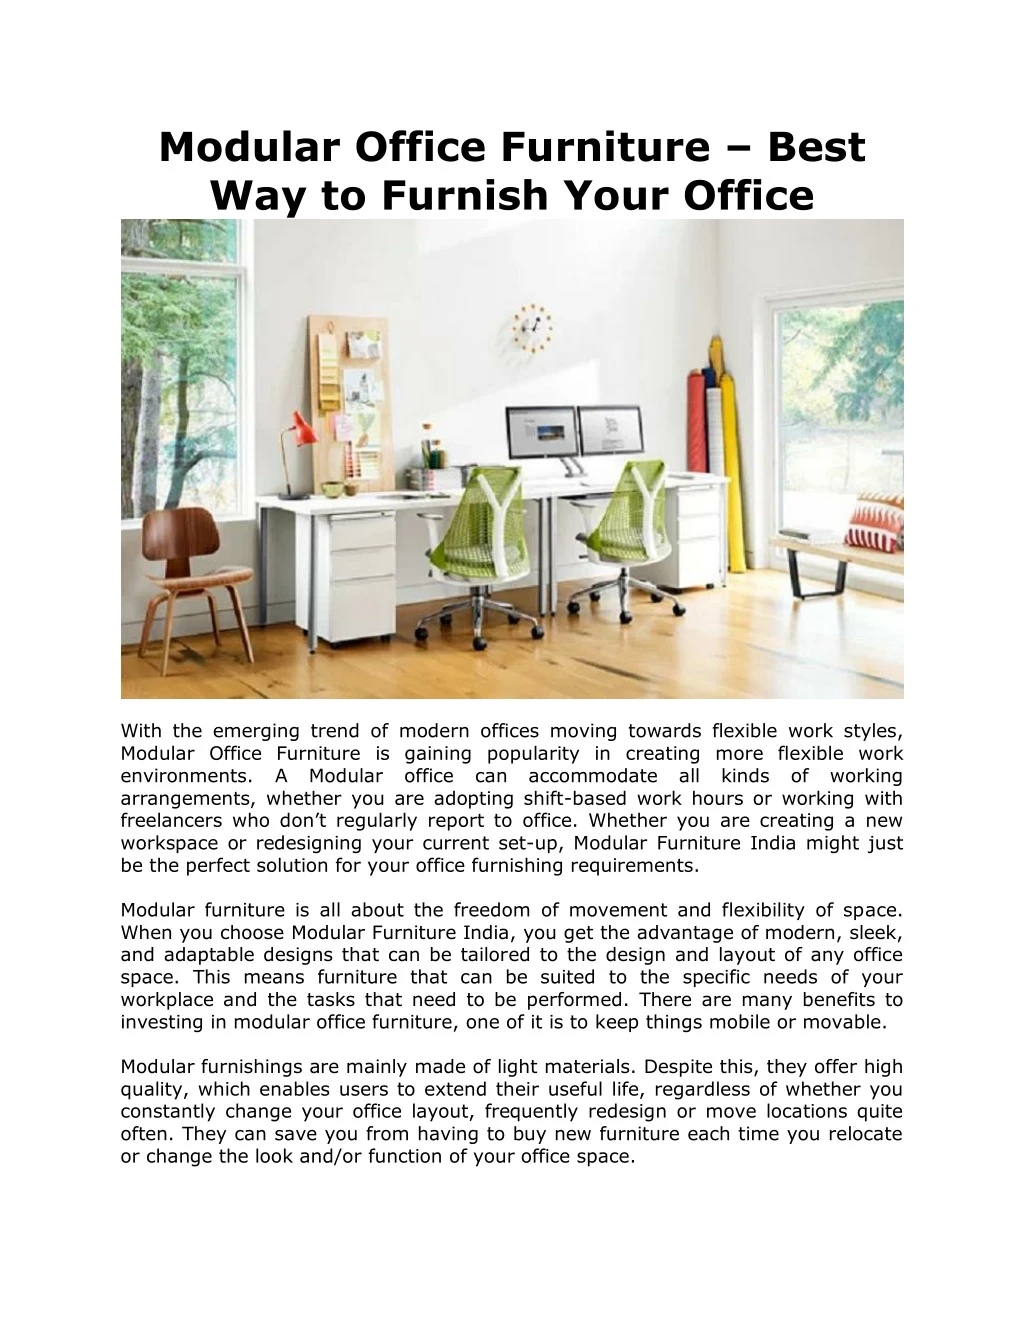 modular office furniture best way to furnish your